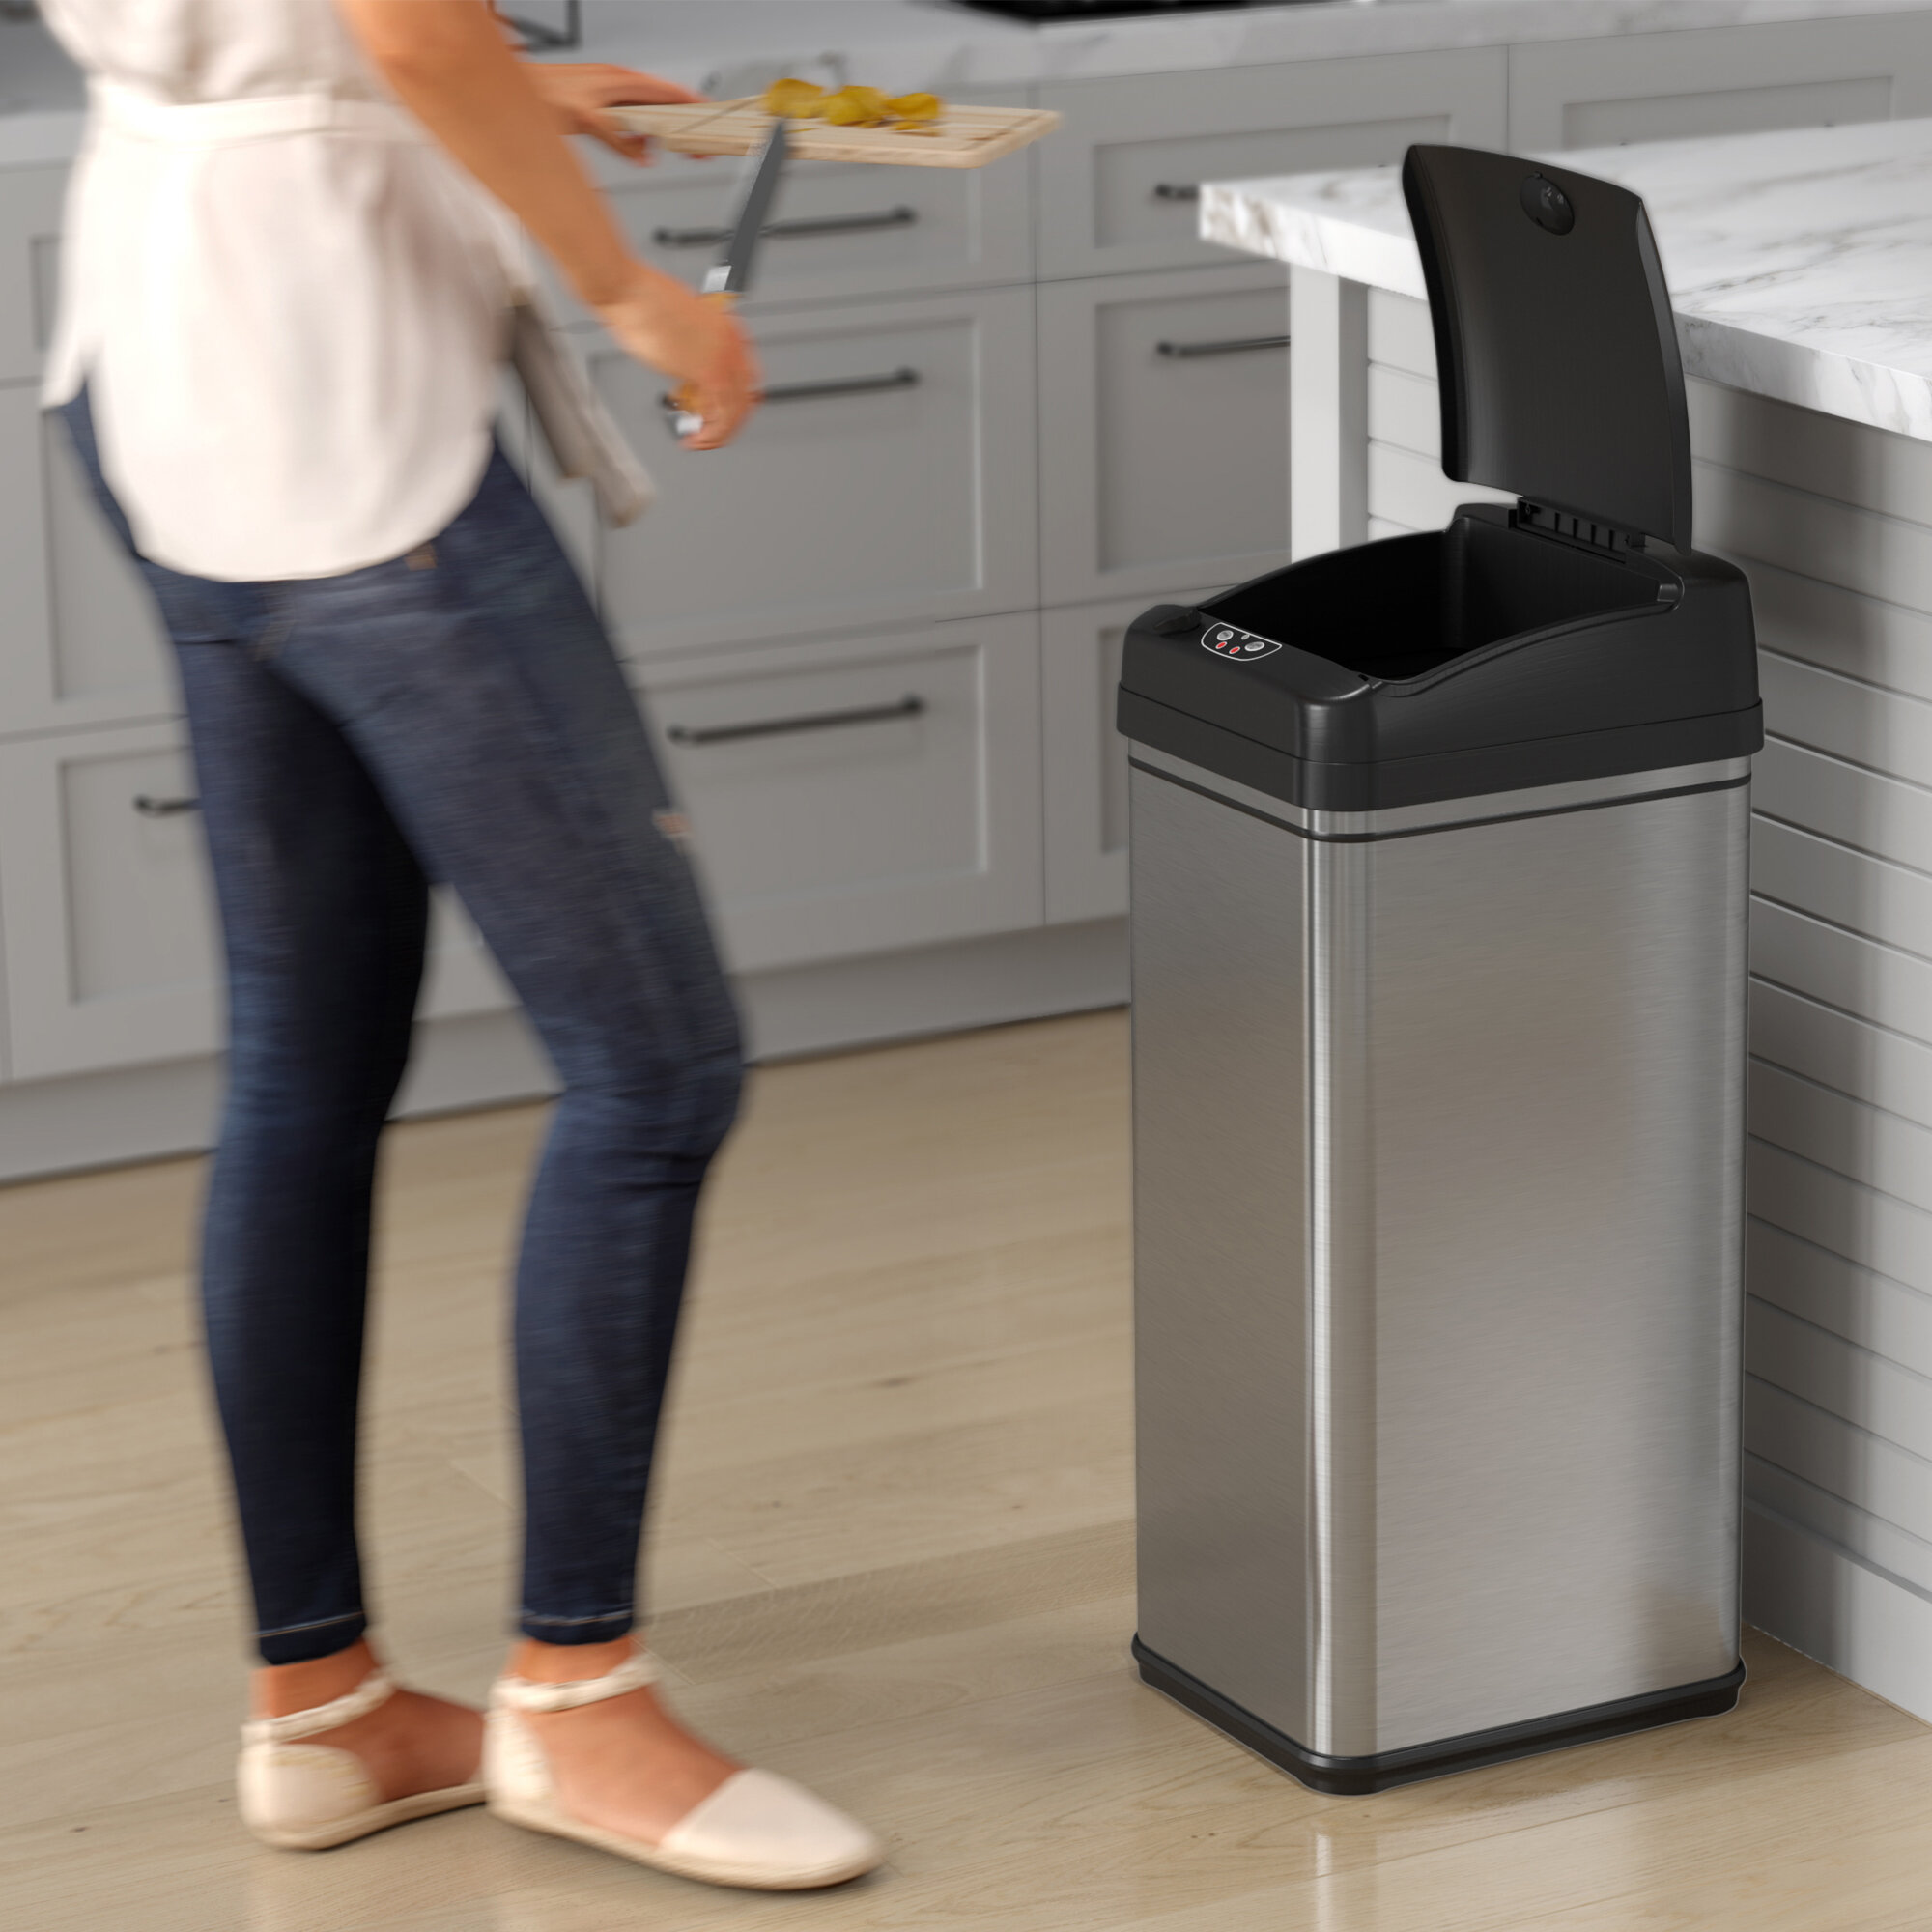 Touchless Trash Can: Buy Motion Sensor Bins, & Automatic Bathroom Trash  Cans, & Dispensers